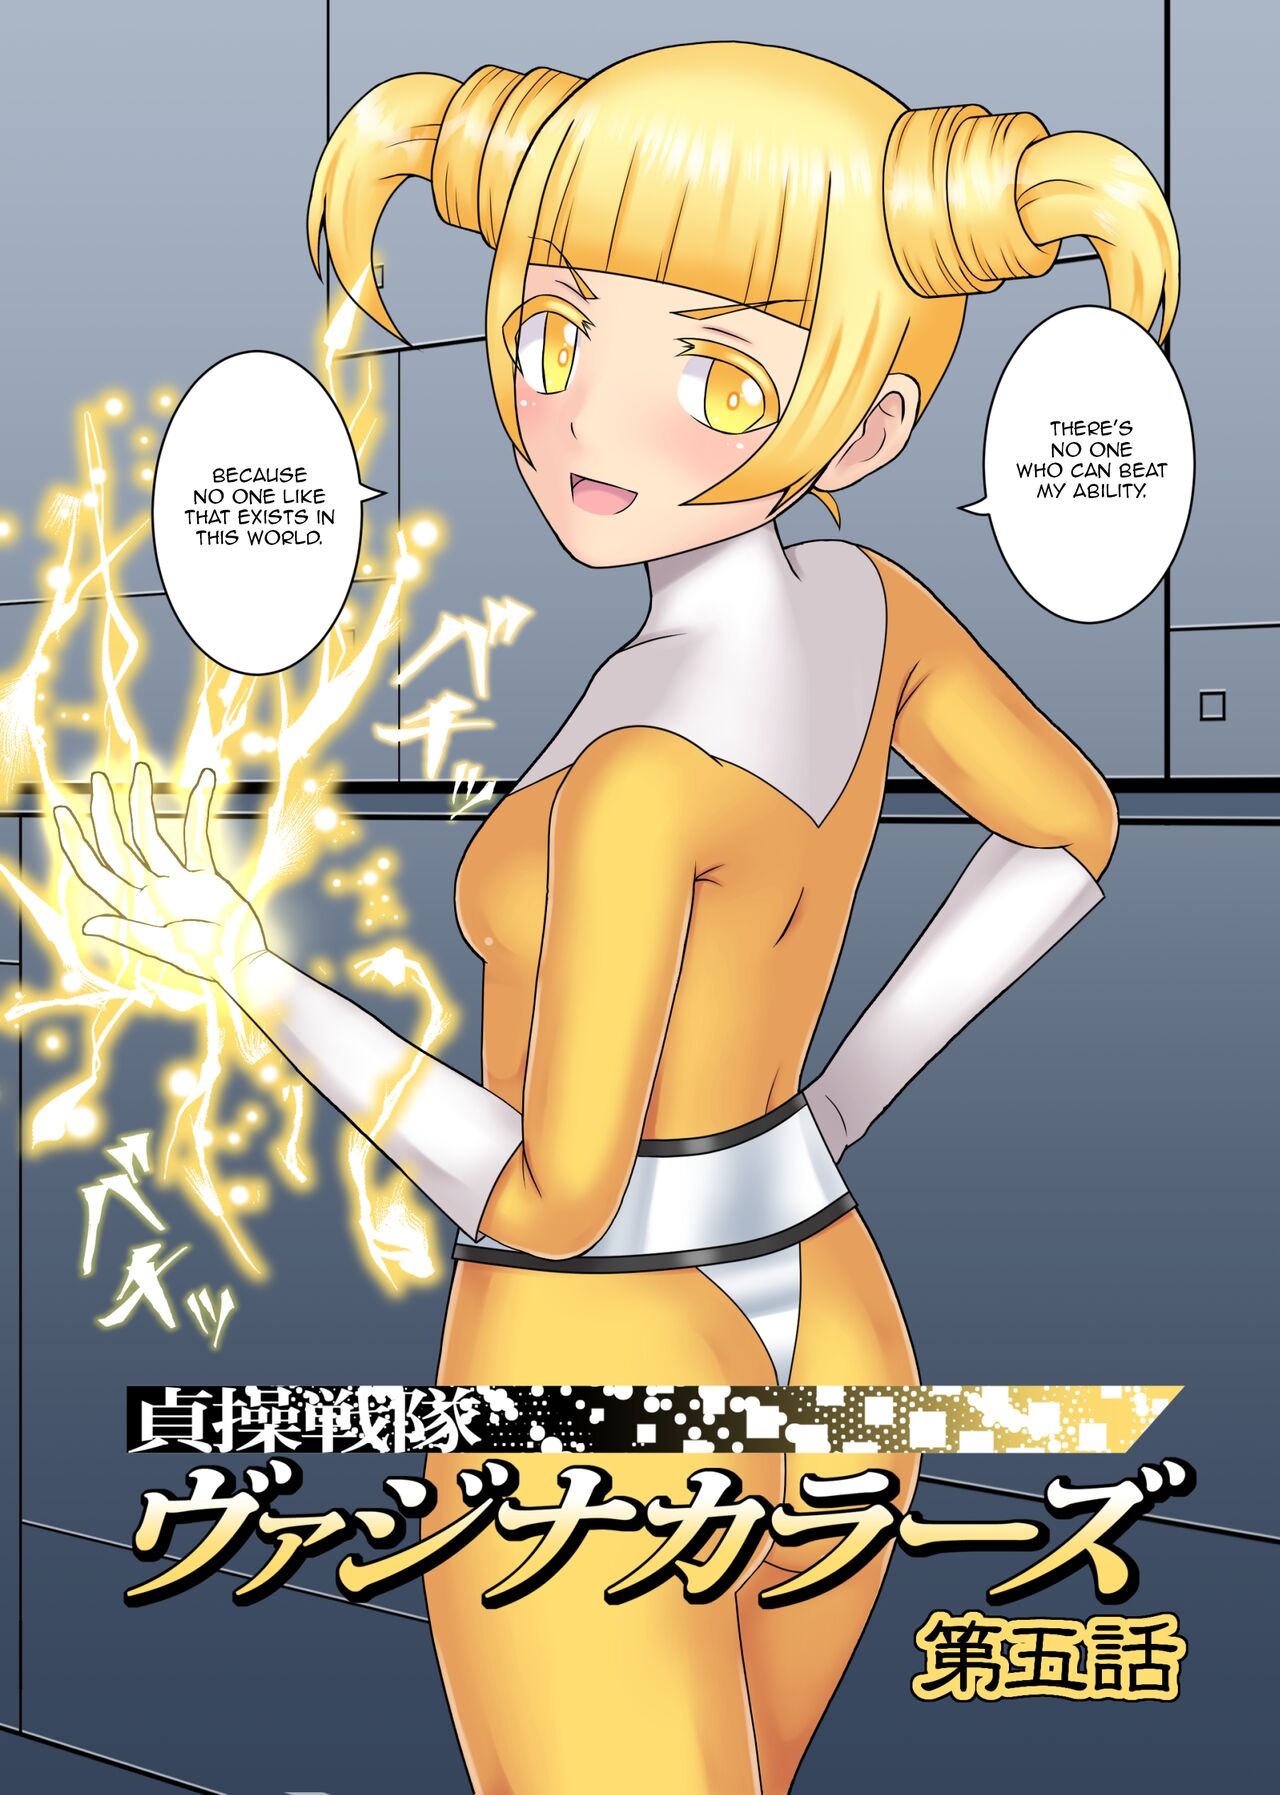 [STUDIO HP+ (IceLee)] Teisou Sentai Virginal Colors Ch.5 | Chastity Sentai Chaste Colors Ch. 5[English] 7